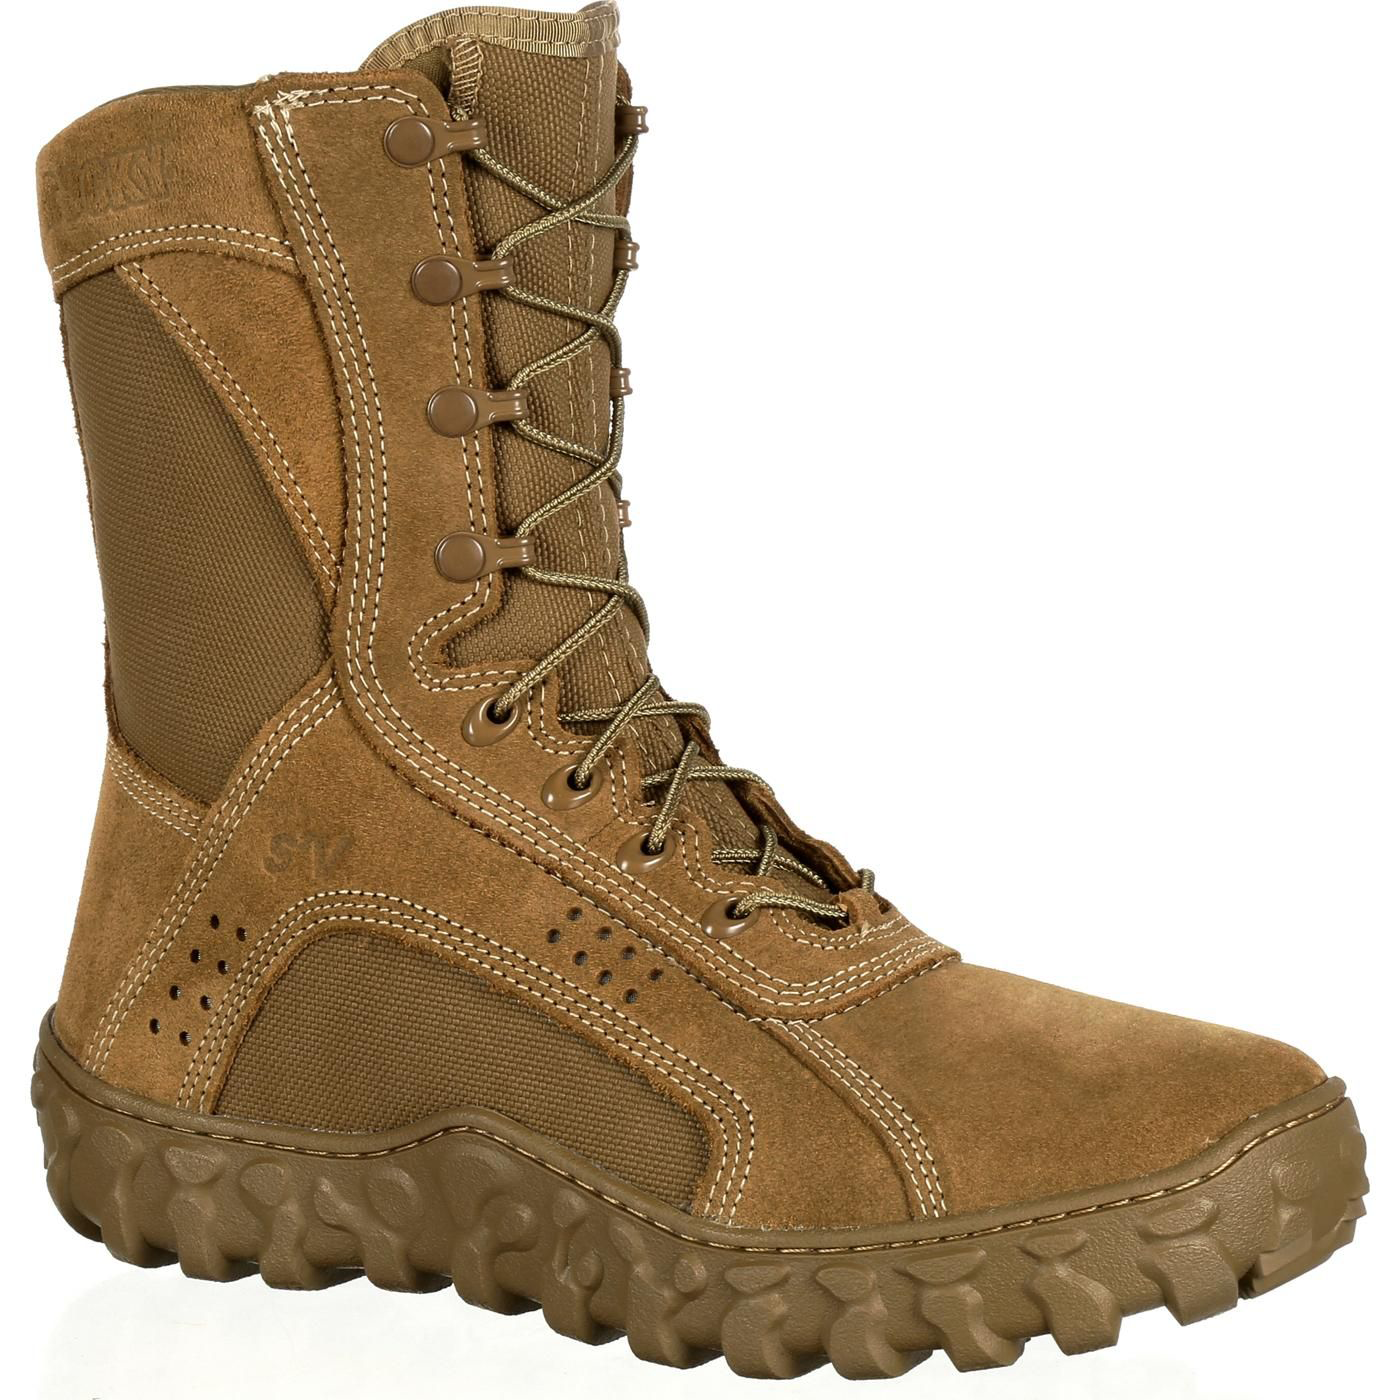 Rocky S2V Tactical Military Boots for Men - Coyote Brown - 13M